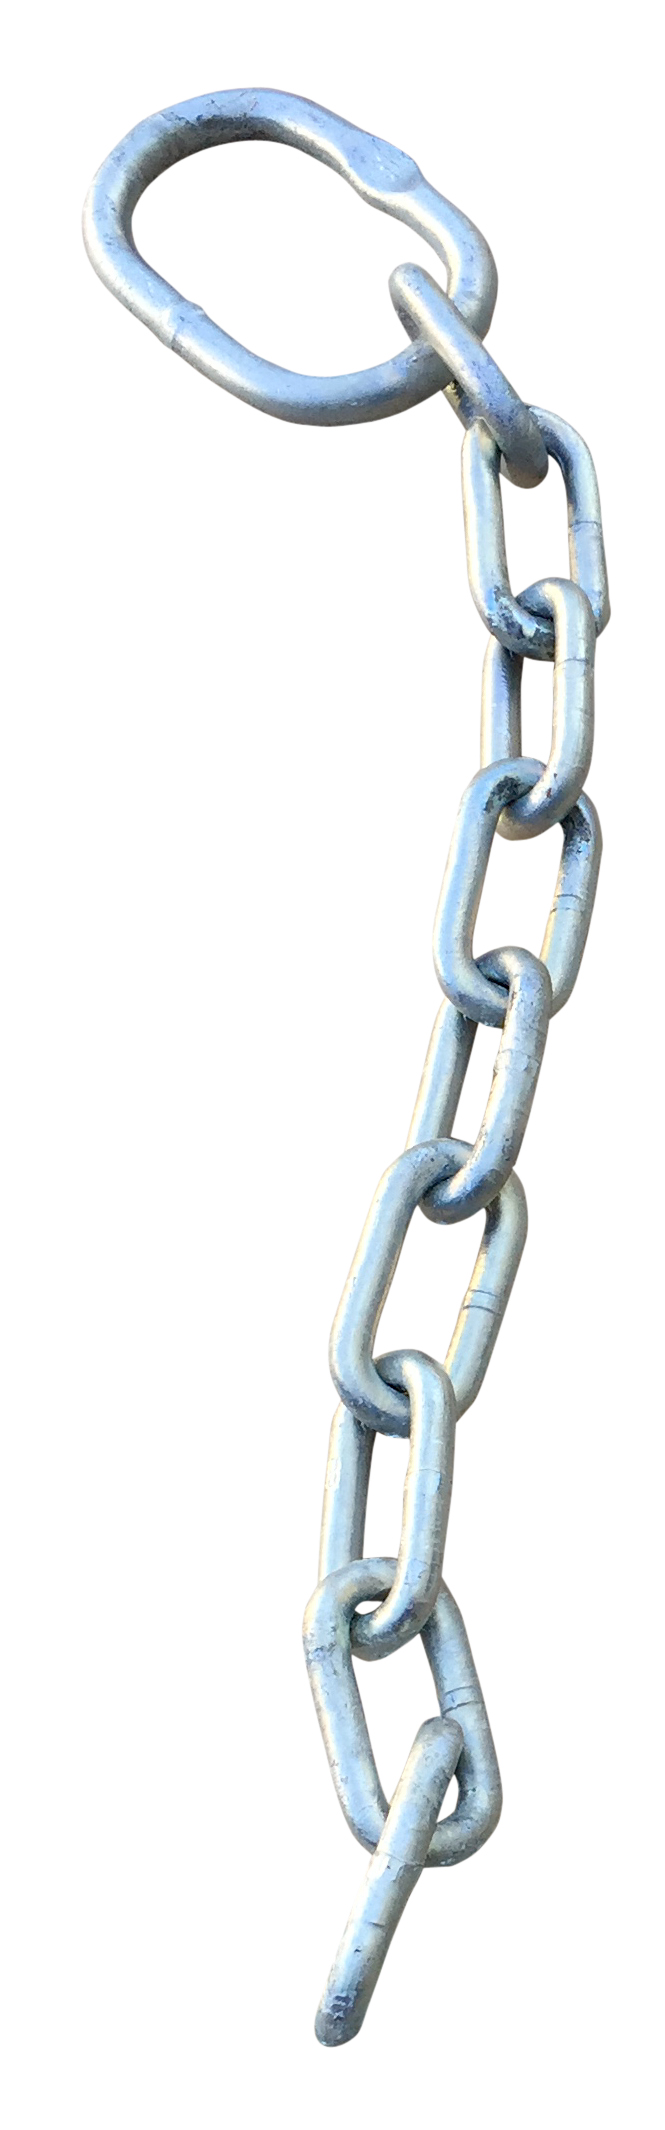 FRAM Chain slings thermo galvanized